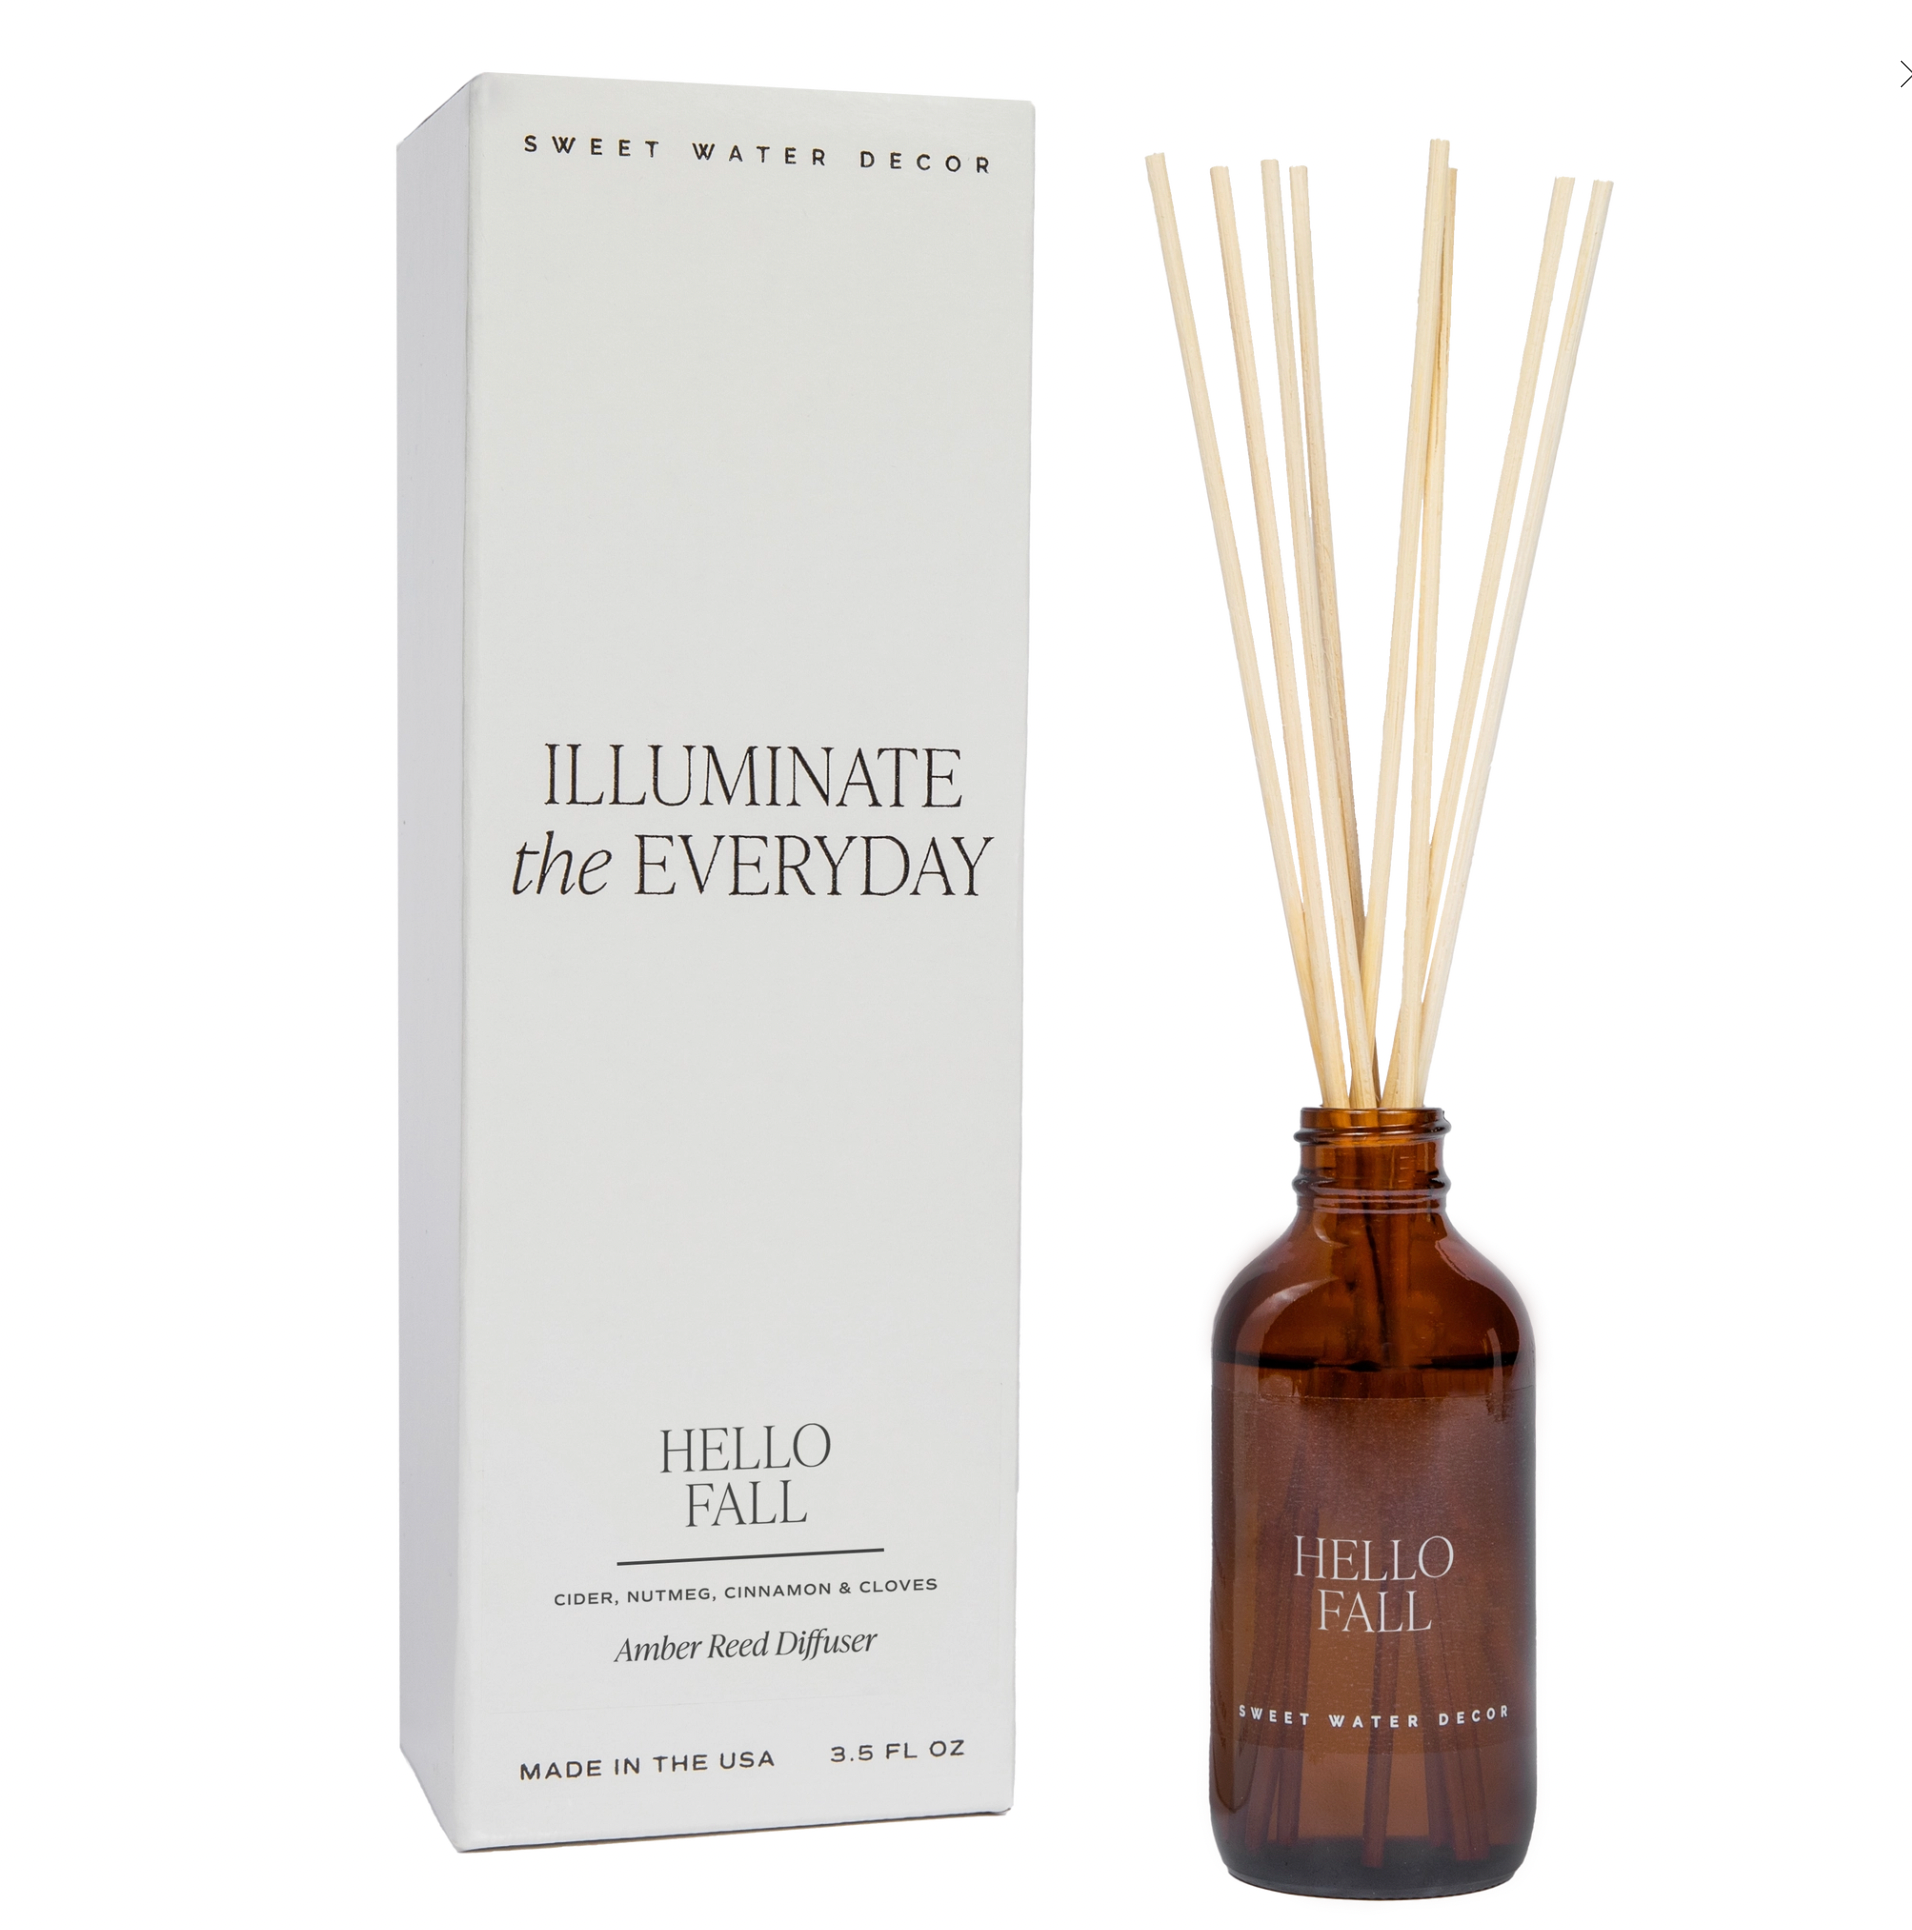 Hello Fall Amber Reed Diffuser - Home Decor & Gifts